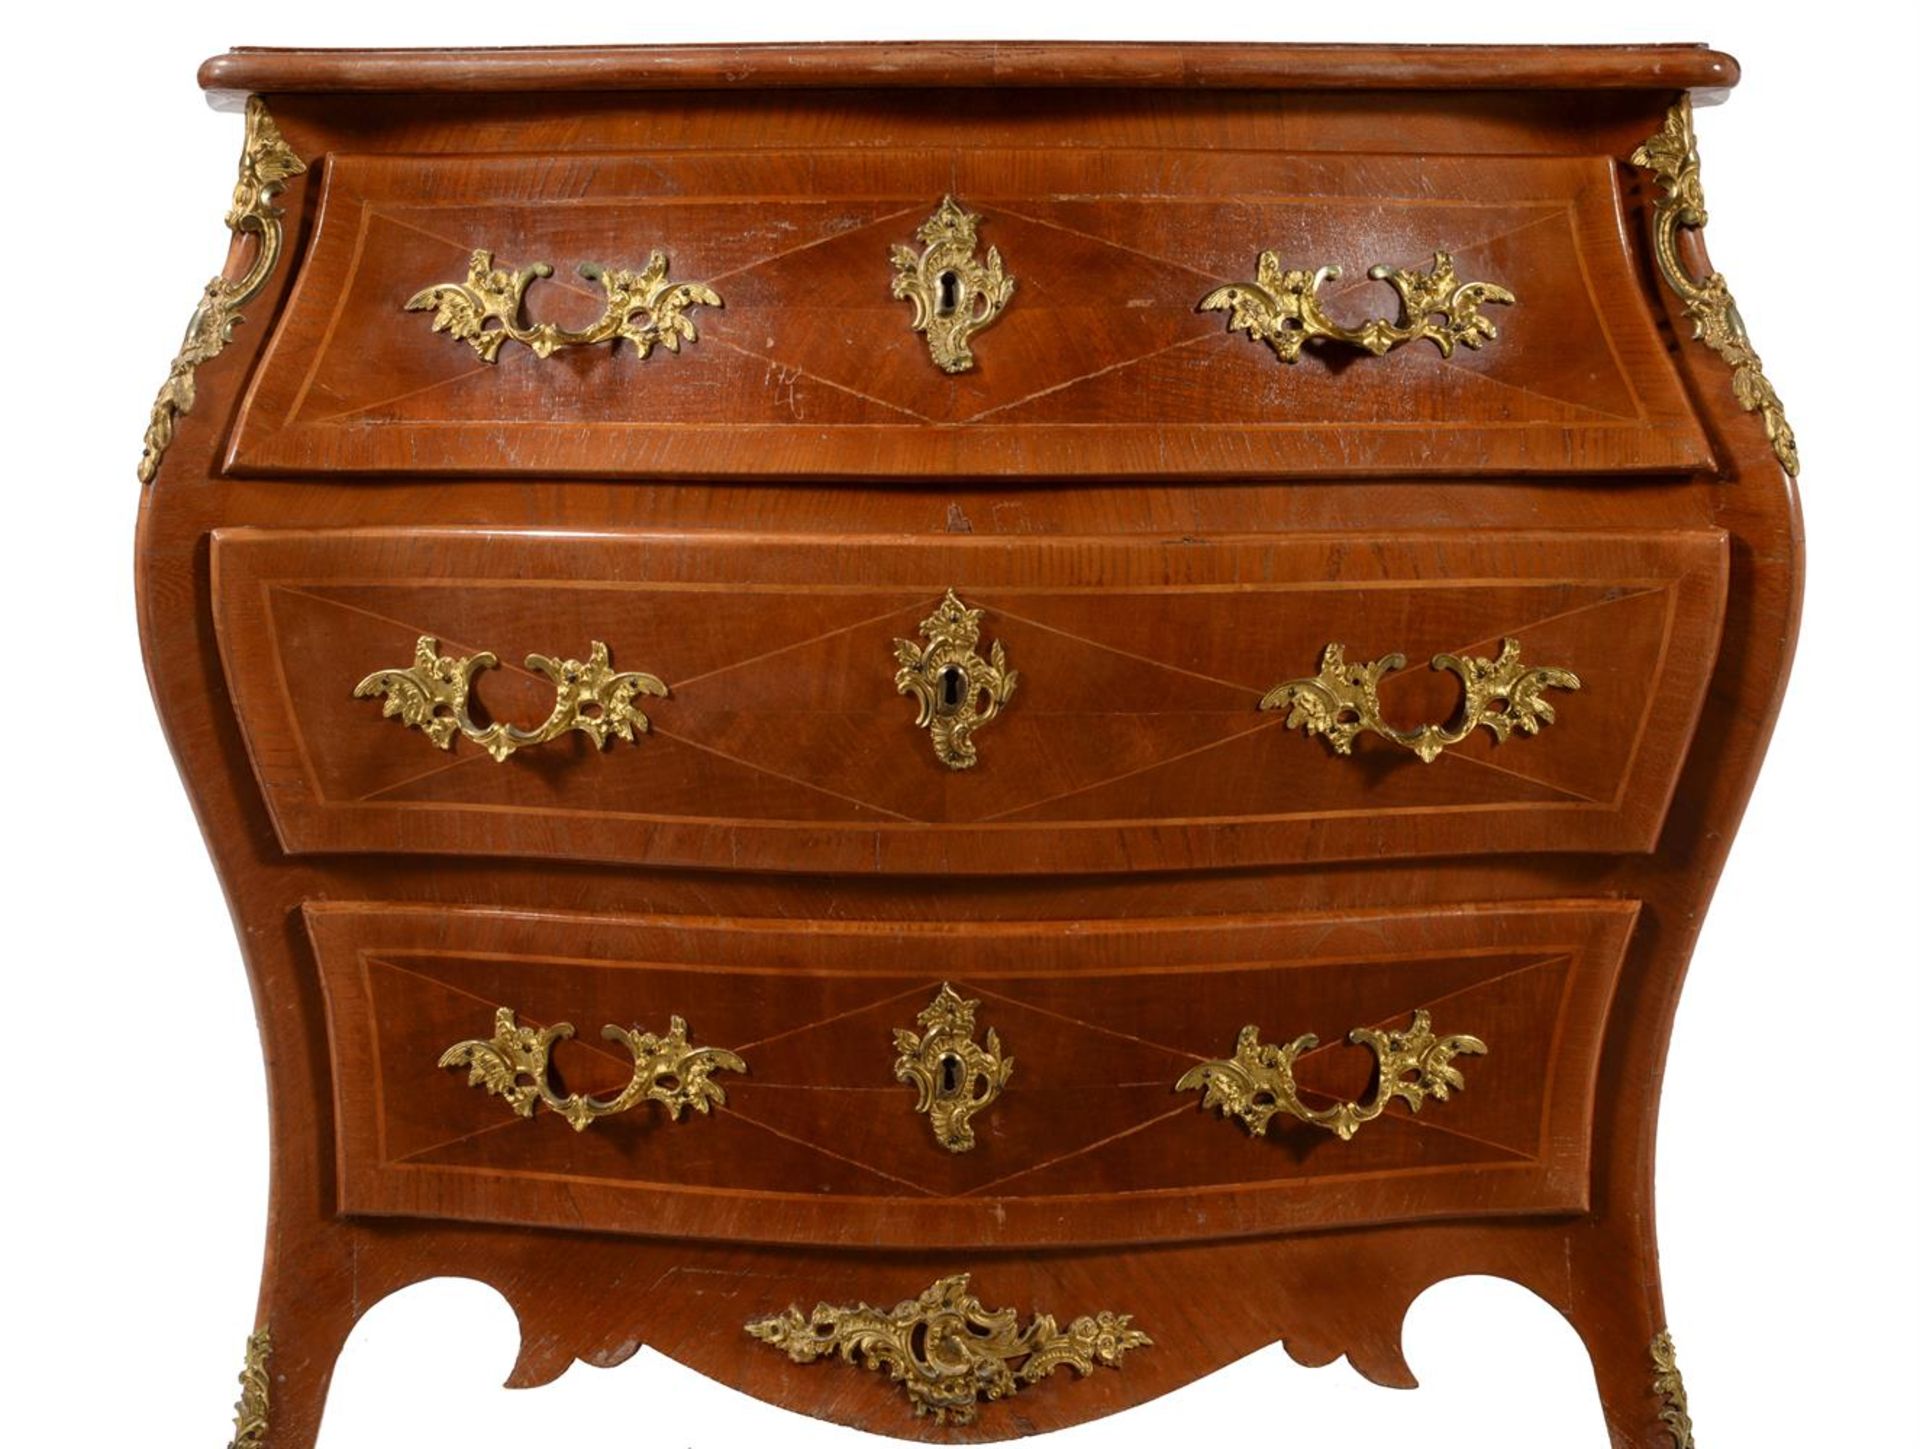 Y A French chestnut and kingwood banded commode in Louis XV/XVI transitional style - Image 3 of 4